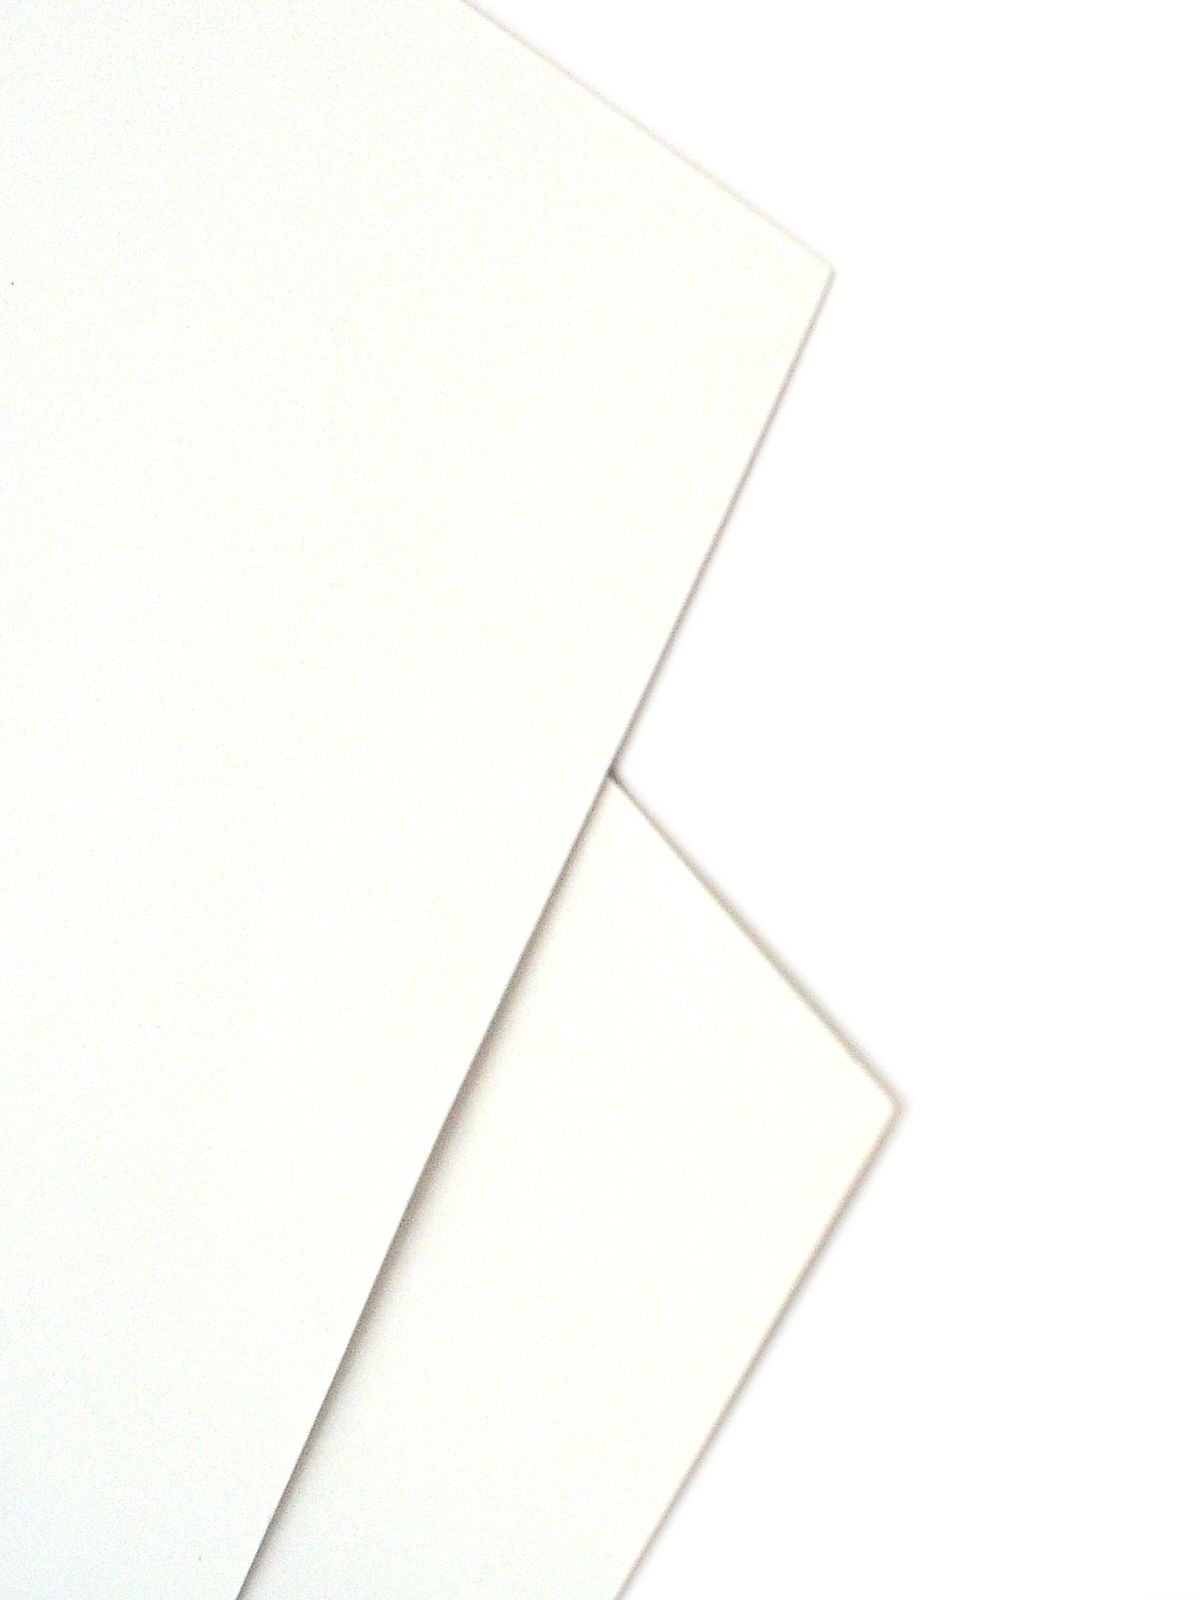 Strathmore - Series 400 Premium Recycled Drawing Sheets